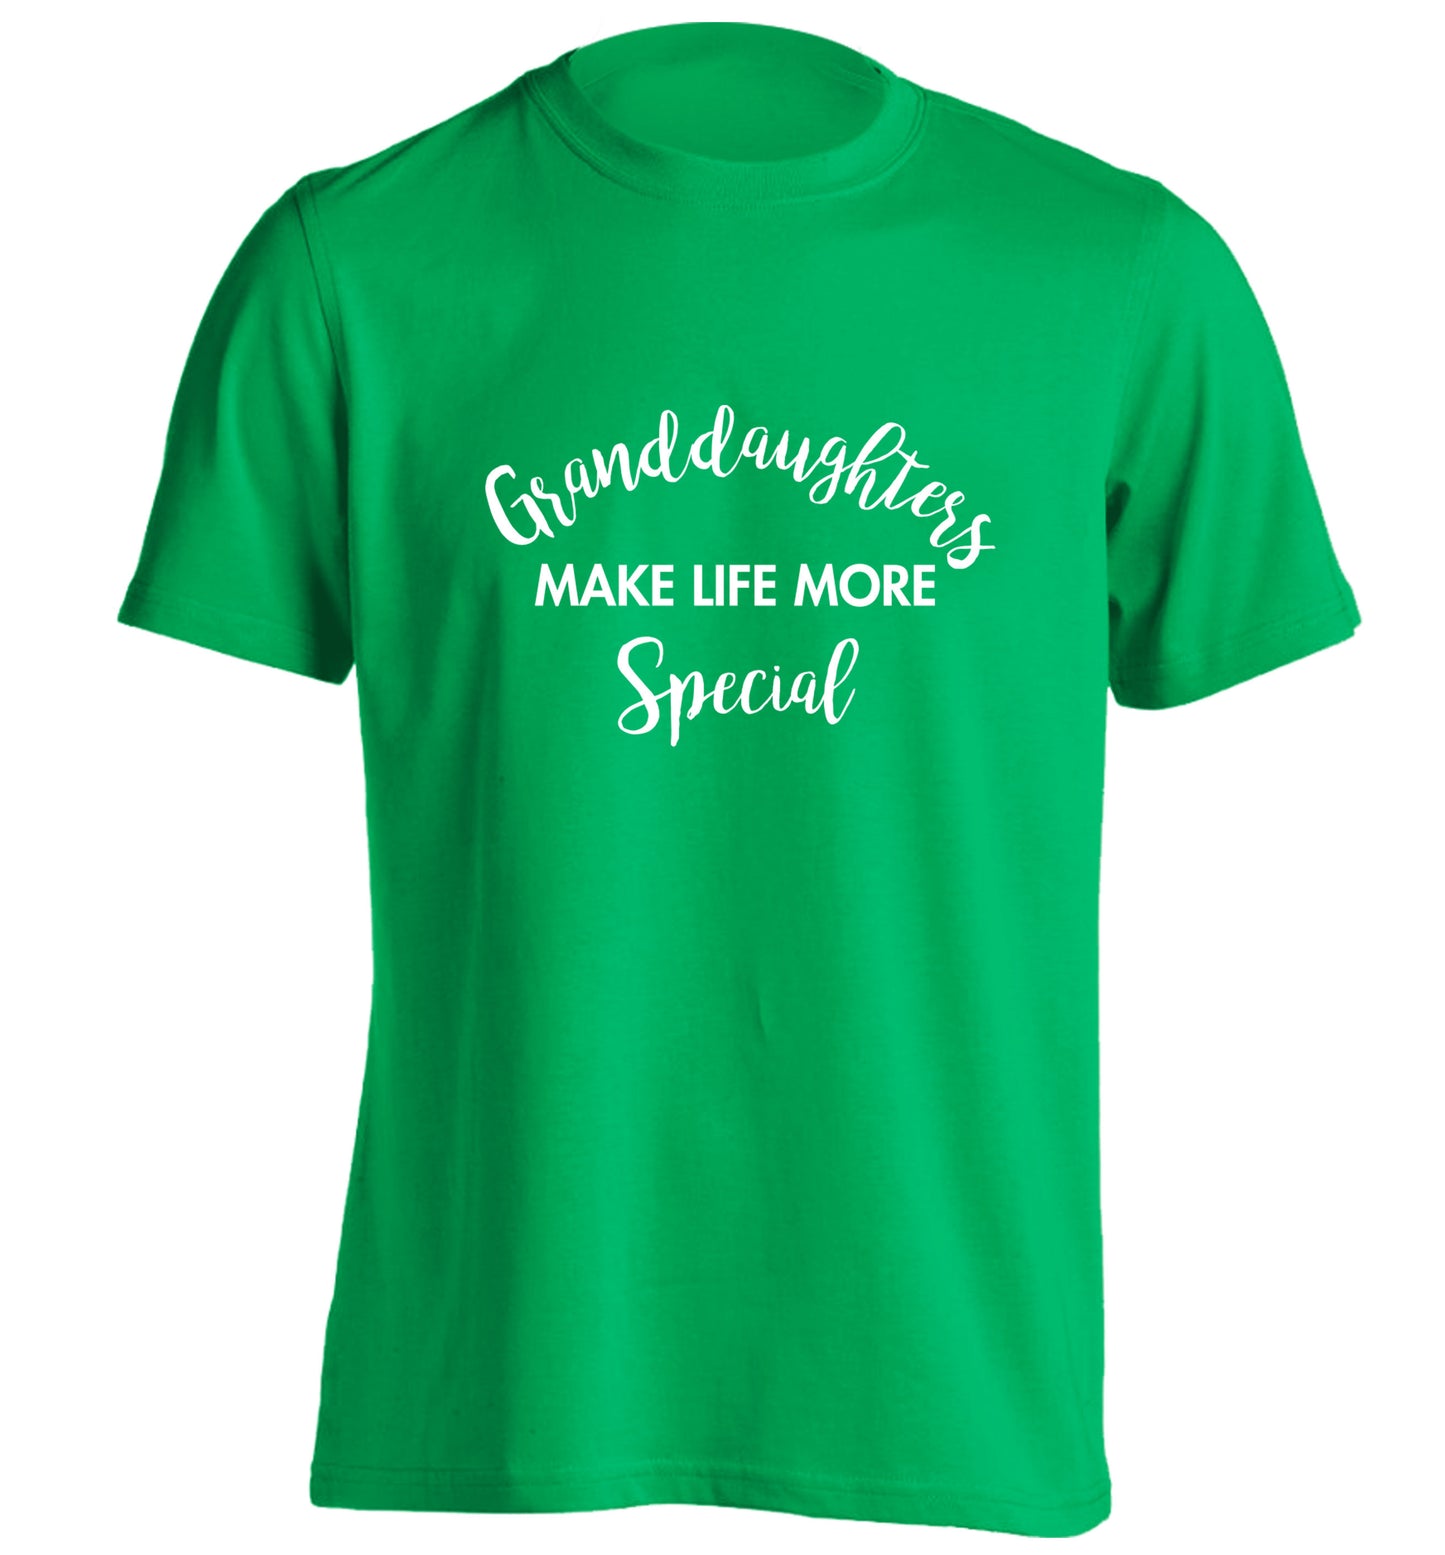 Granddaughters make life more special adults unisex green Tshirt 2XL